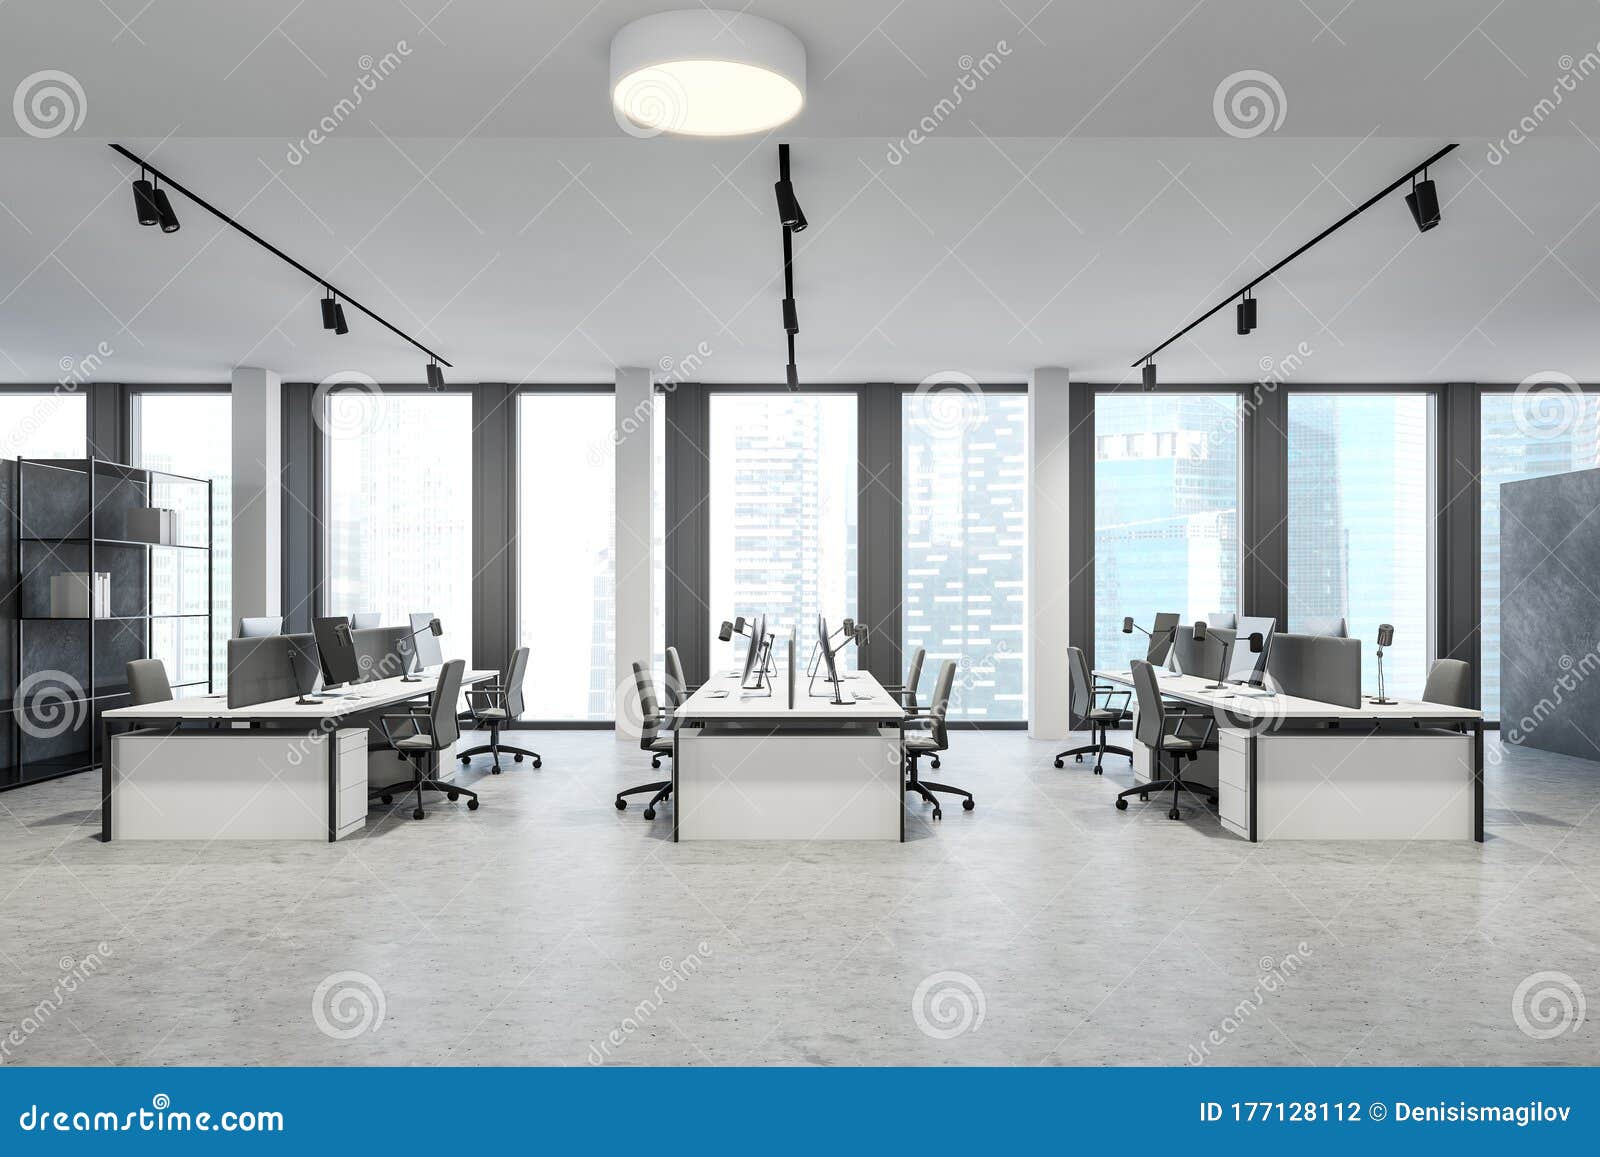 Panoramic White Open Space Office Side View Grey Walls Concrete Floor Rows Computer Tables Consulting Company Concept 177128112 